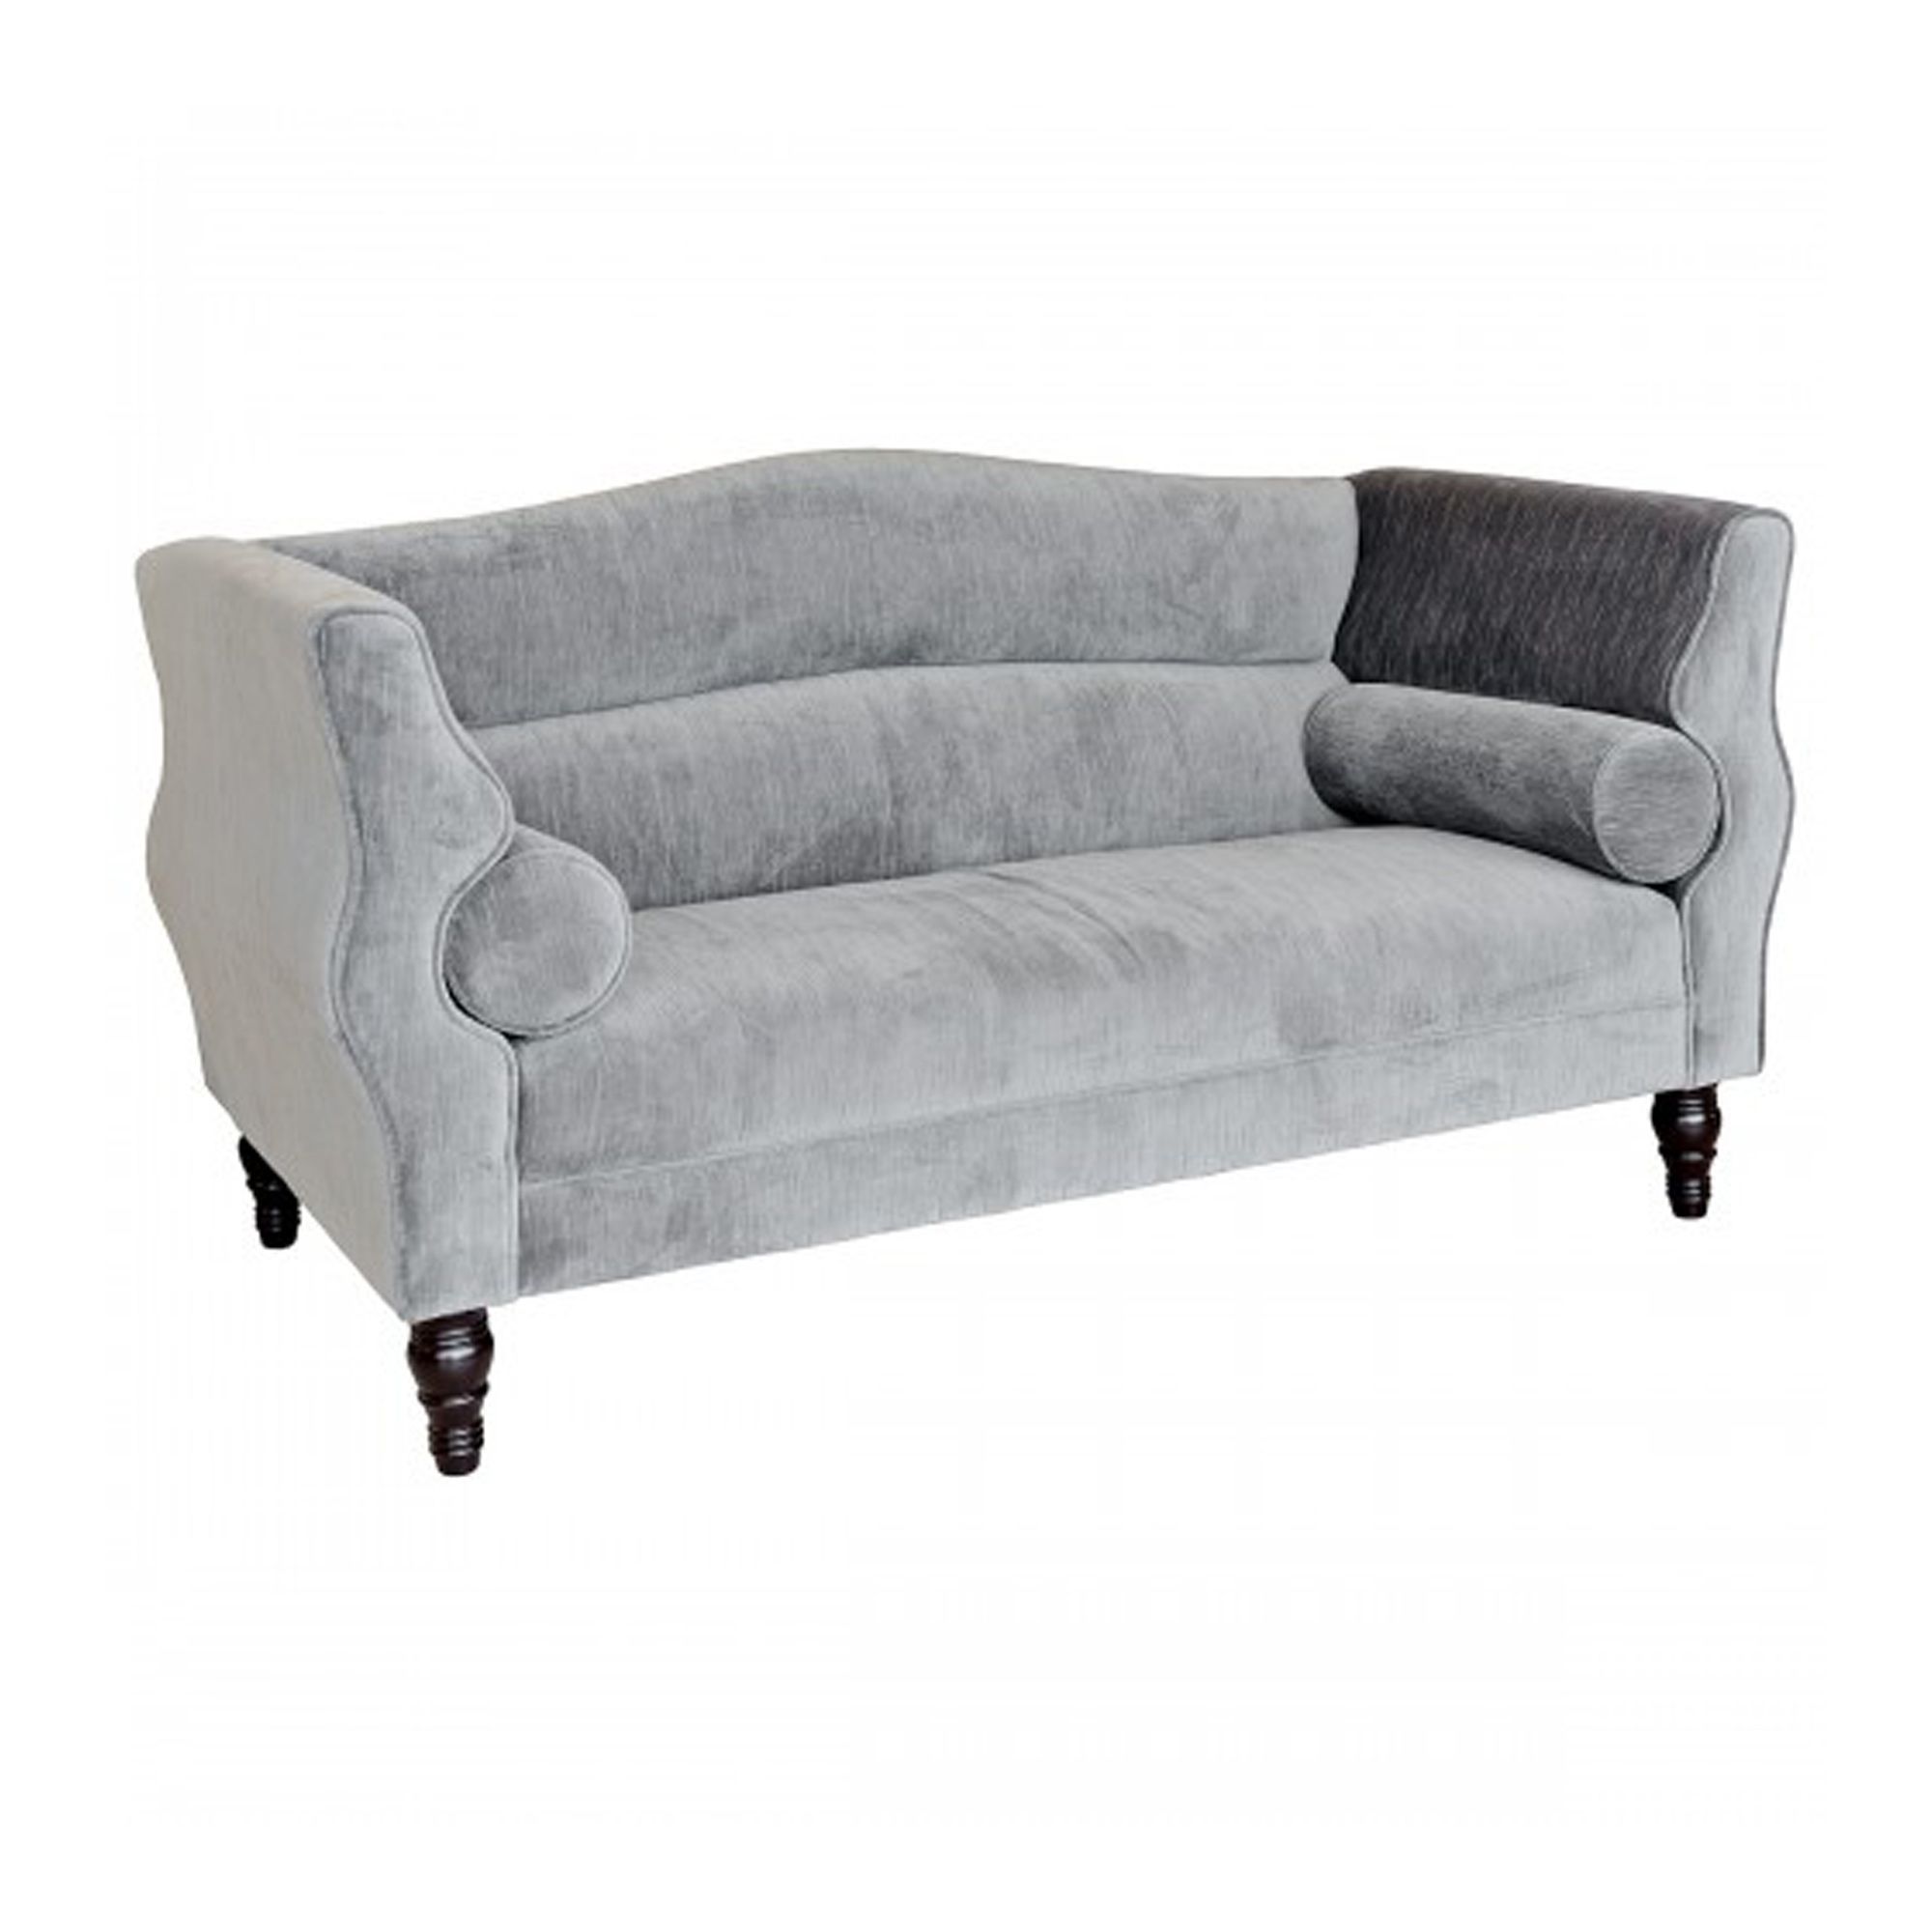 Janette Light Grey Sofa | Modern & Contemporary | Sofas In Sofas In Light Grey (Gallery 18 of 20)